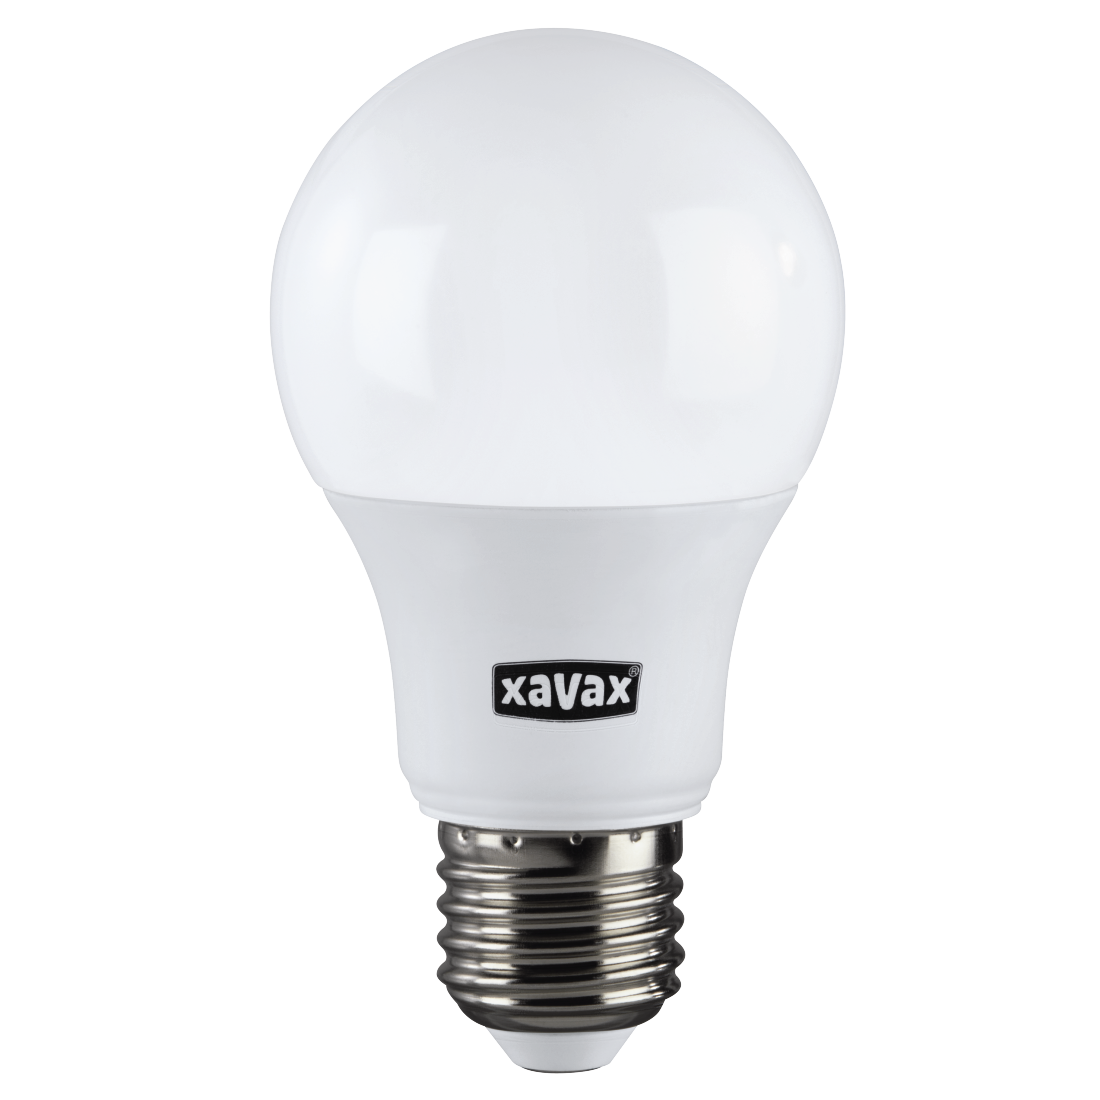 abx High-Res Image - Xavax, LED Lamp, E27, 806 lm Replaces 57 W, Incandescent, warm, 3-stage dimmable